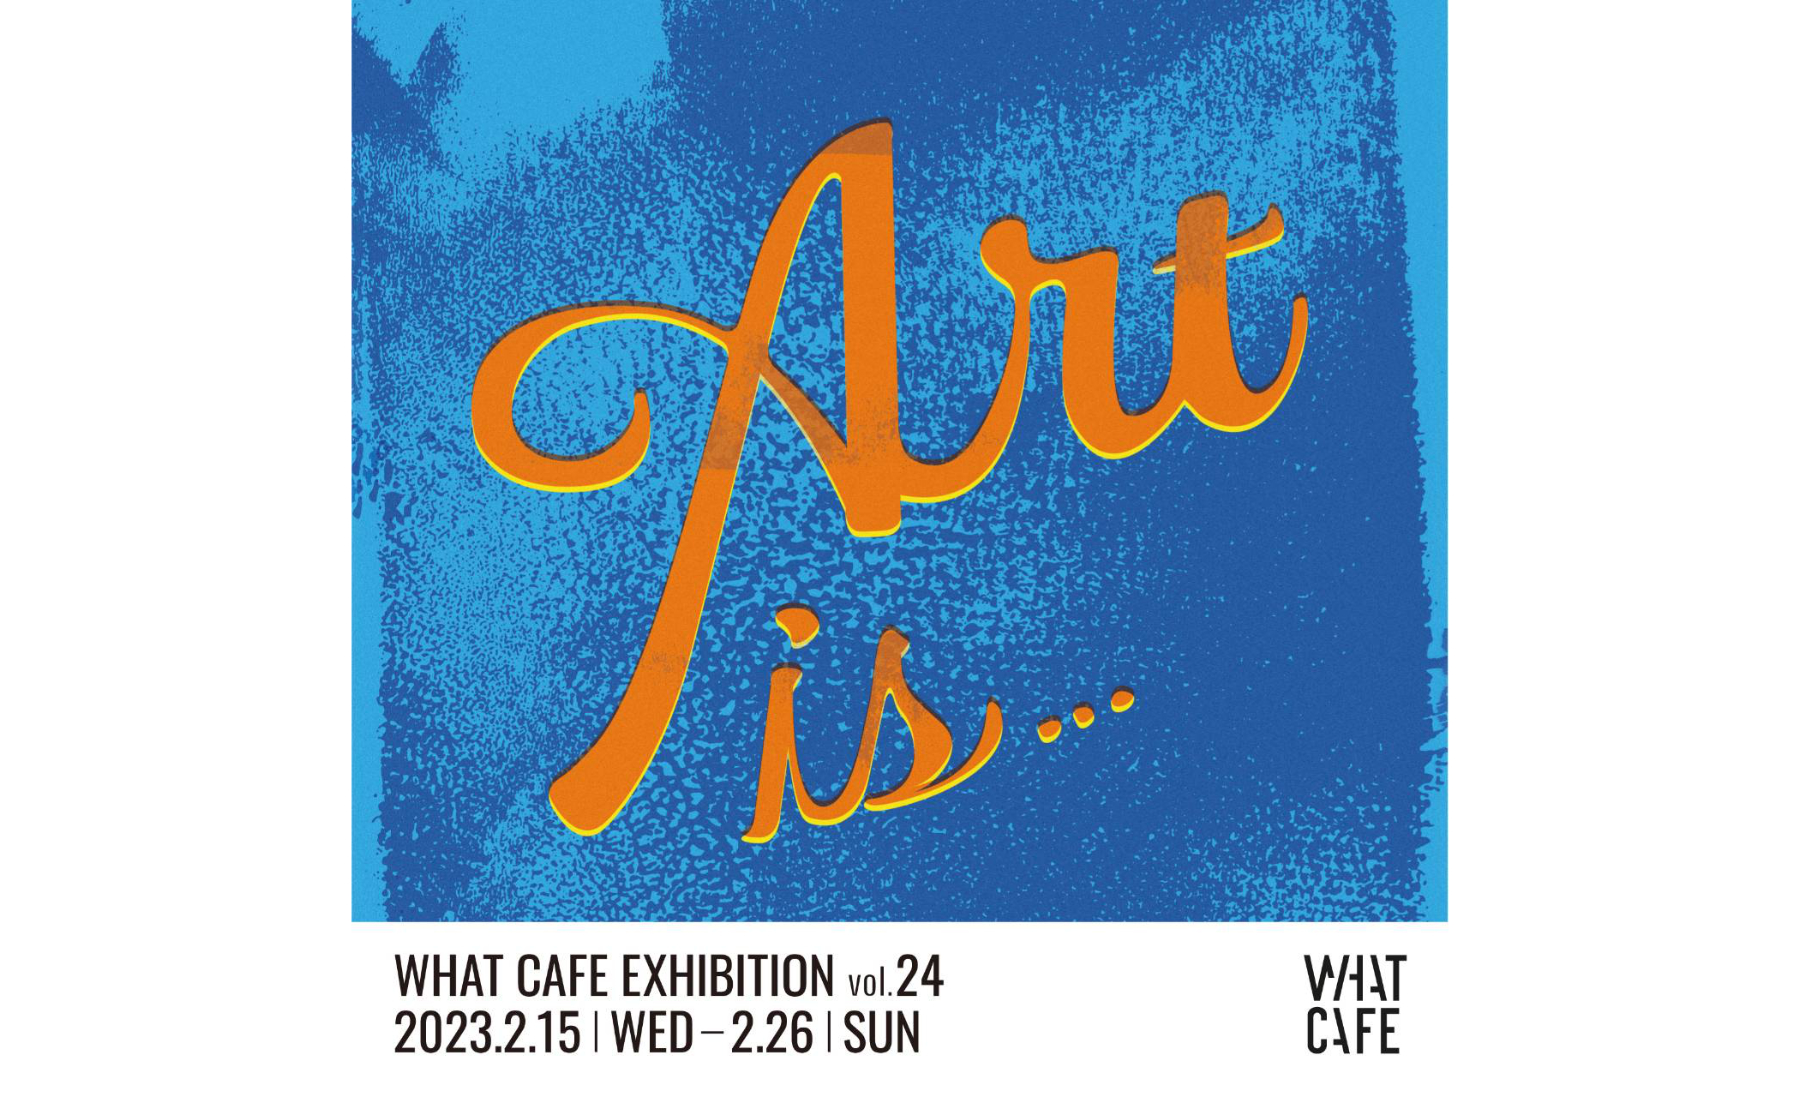 WHAT CAFE EXHIBITION VOL.24